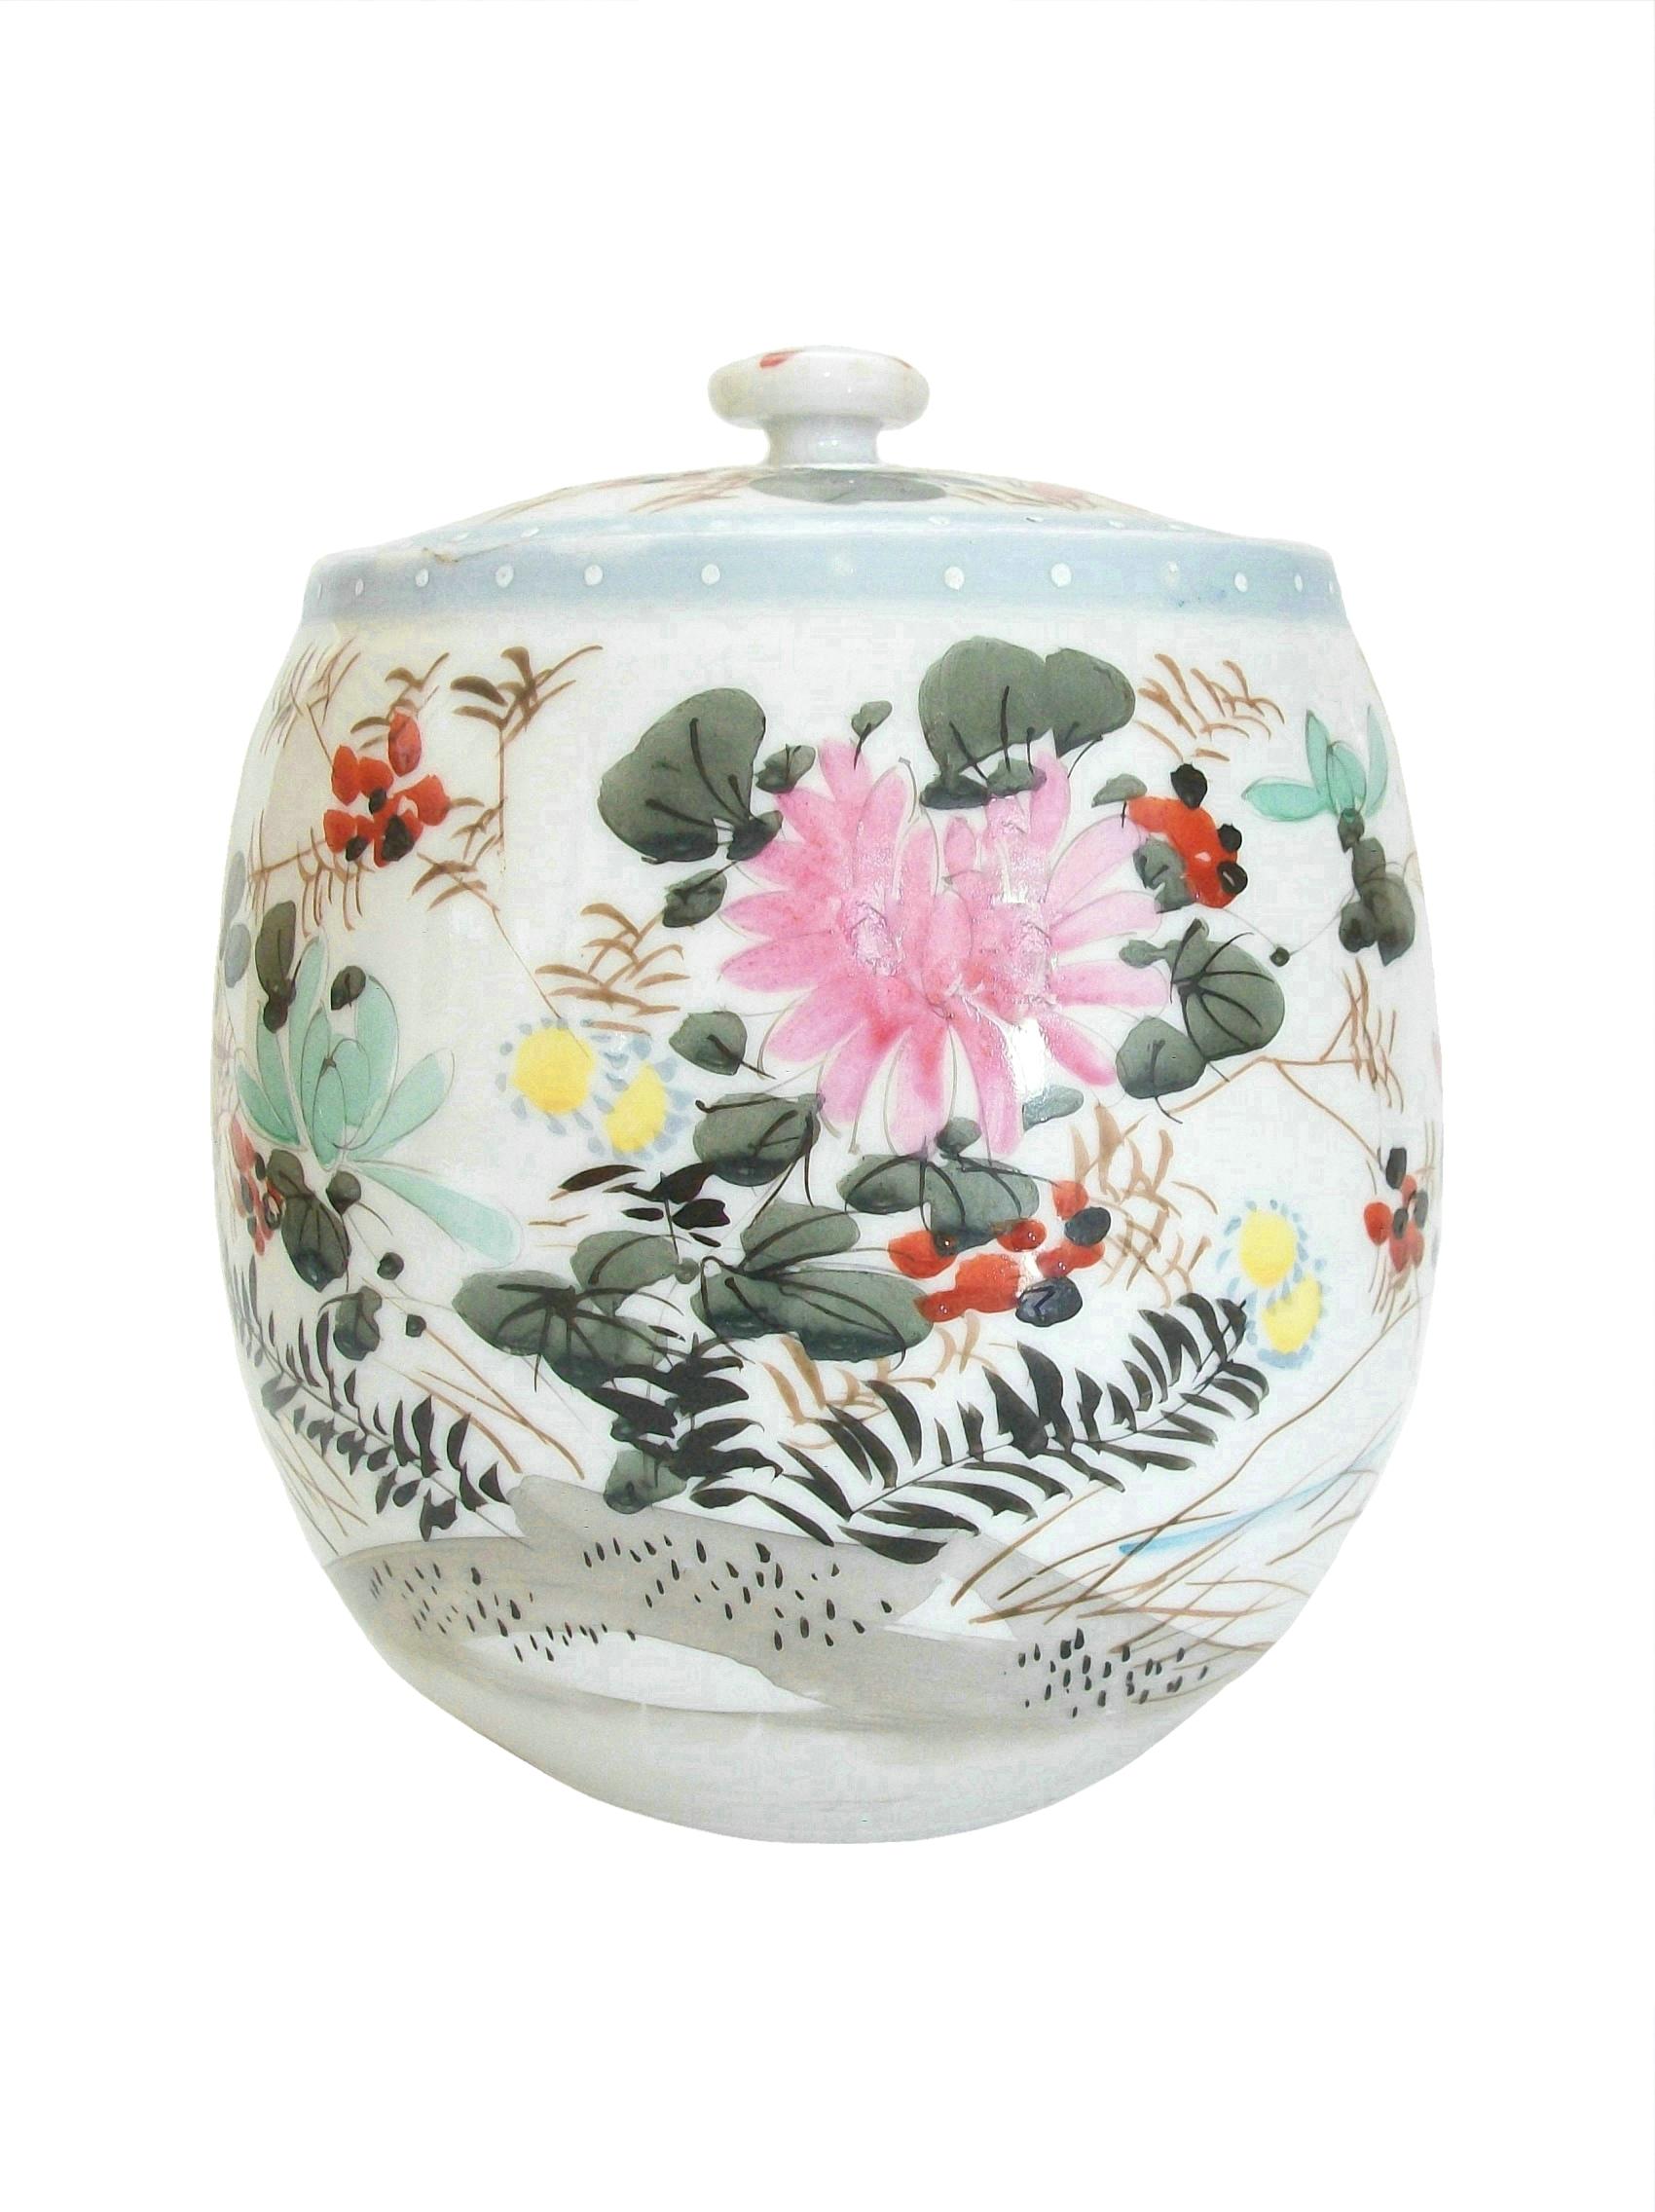 Japanese Antique Meiji Wucai Style Porcelain Jar & Cover, Japan, Early 20th Century For Sale